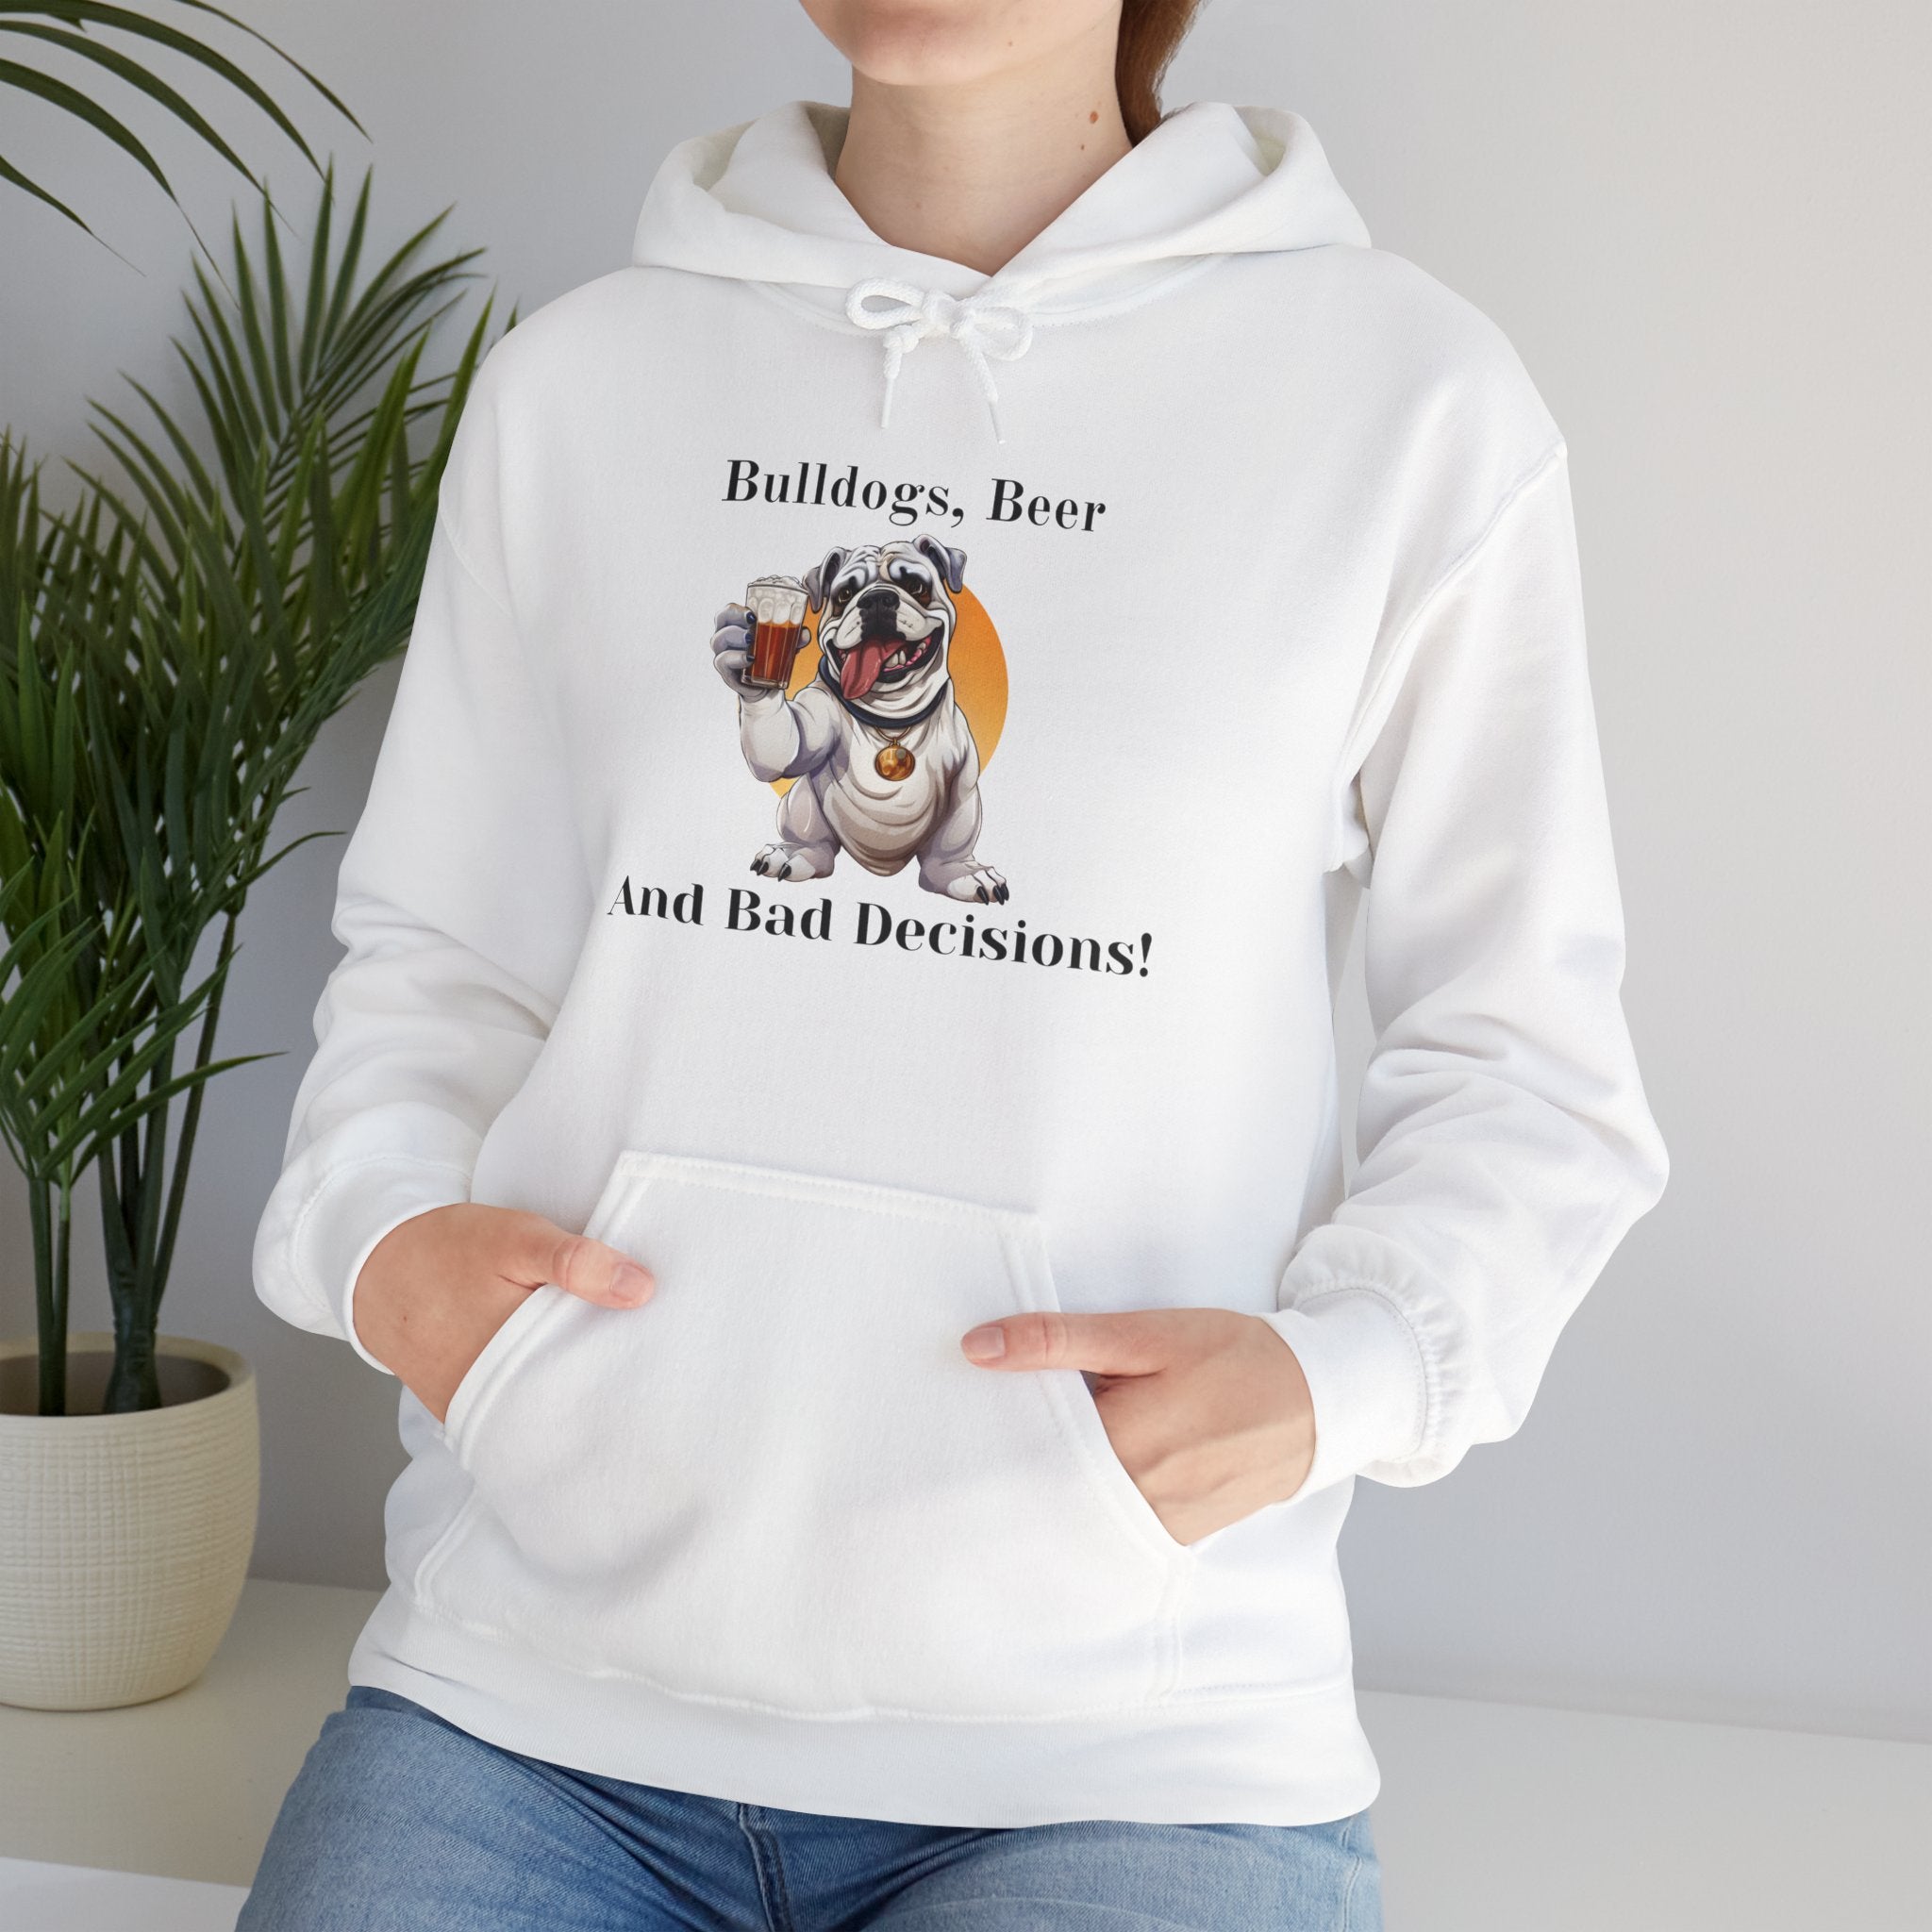 Bulldogs, Beer, and Bad Decisions" Hoodie - Your Go-To Gear for Mischievous Times! (English/White)